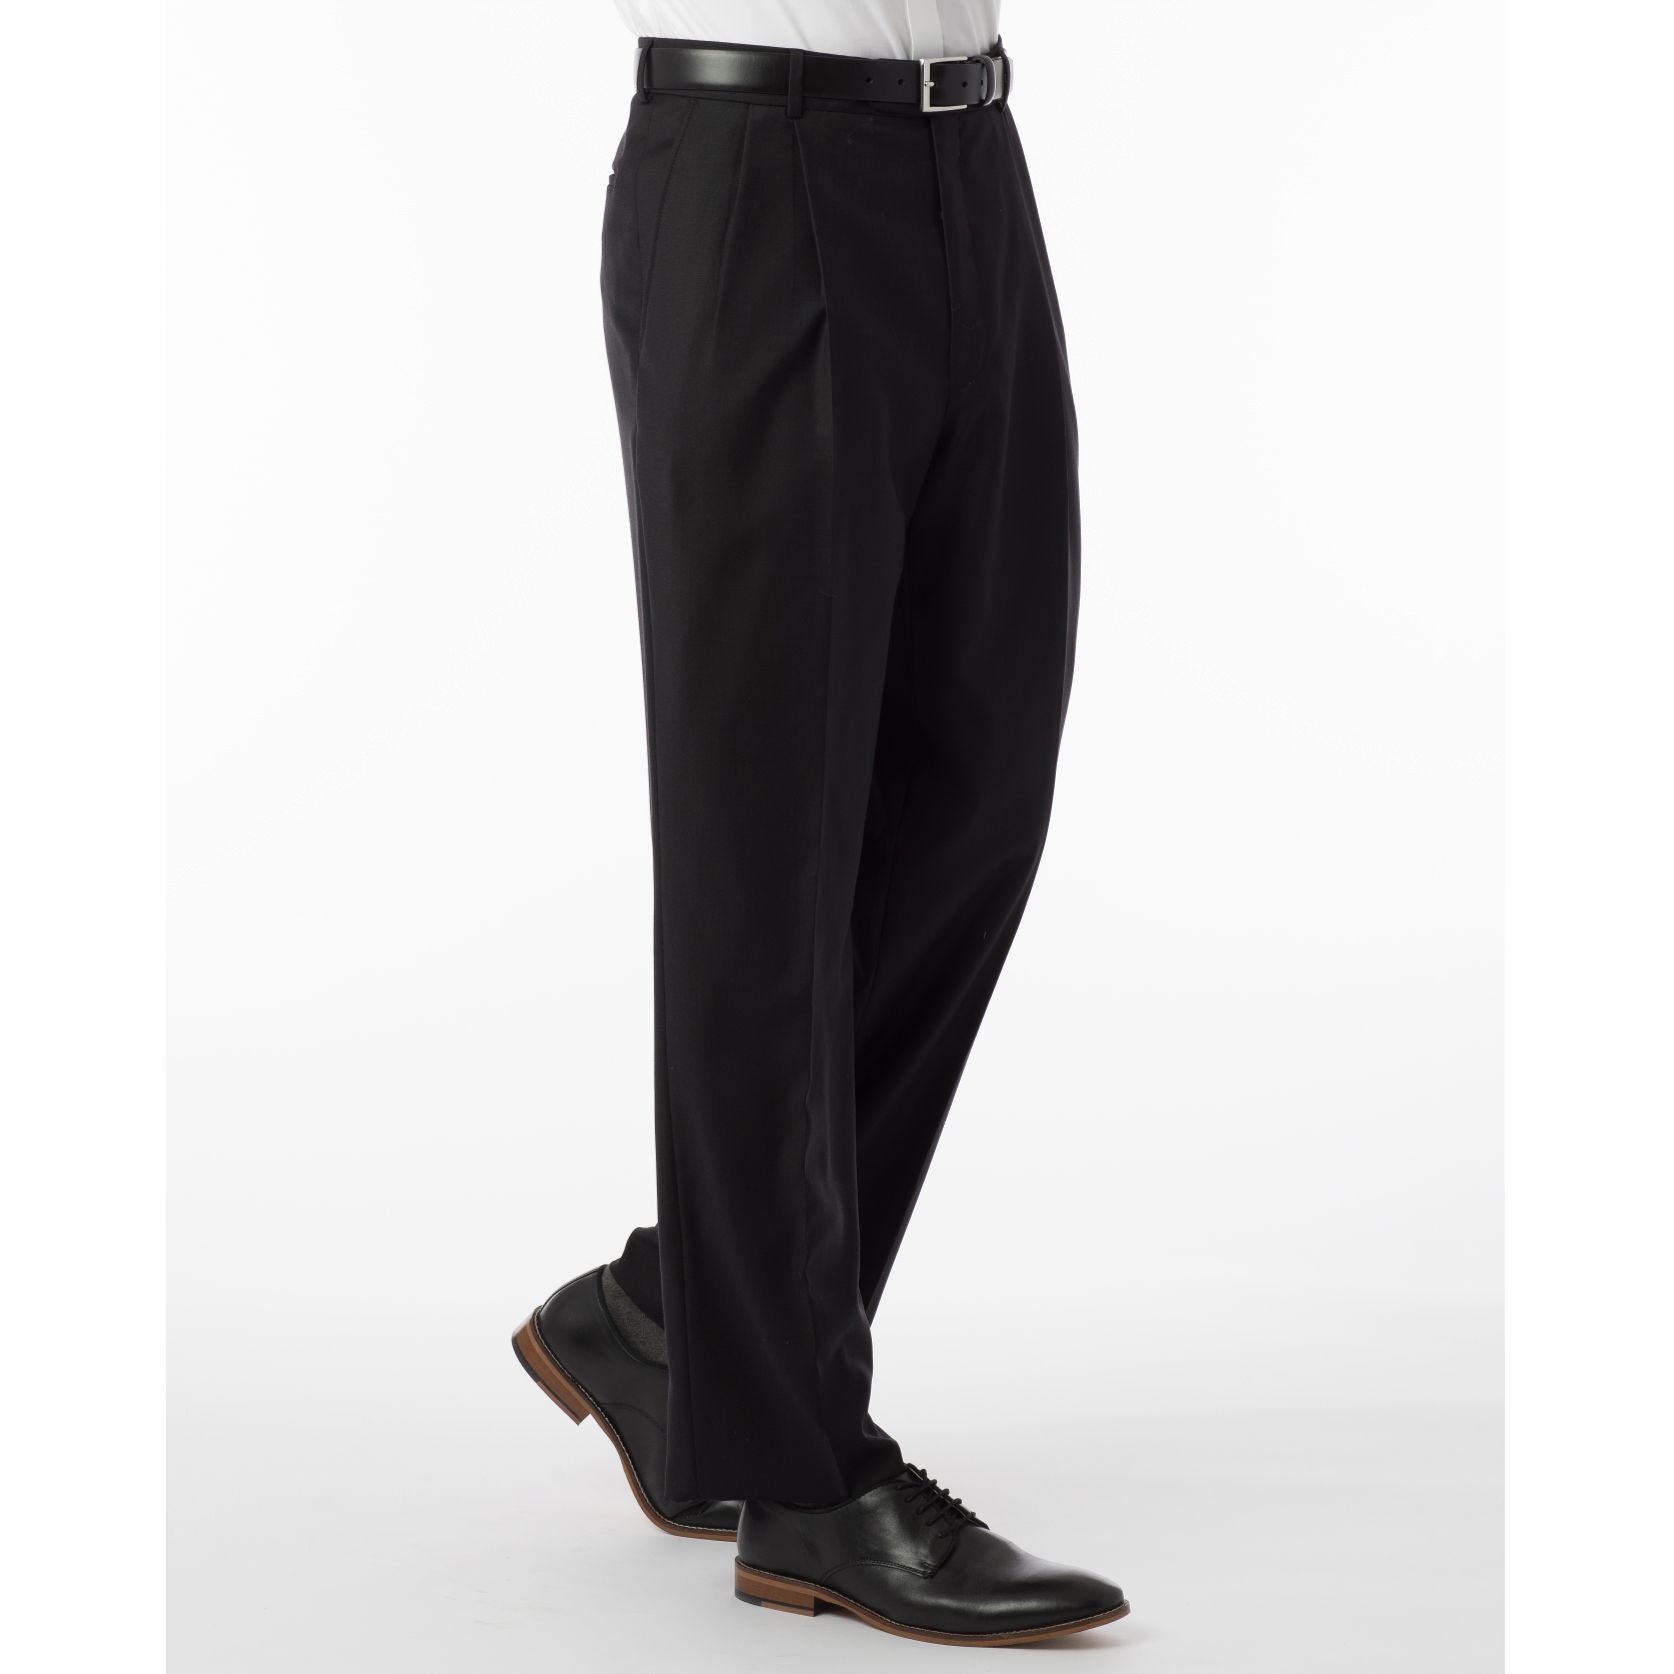 Super 120s Wool Travel Twill Comfort-EZE Trouser in Black (Manchester Pleated Model) by Ballin